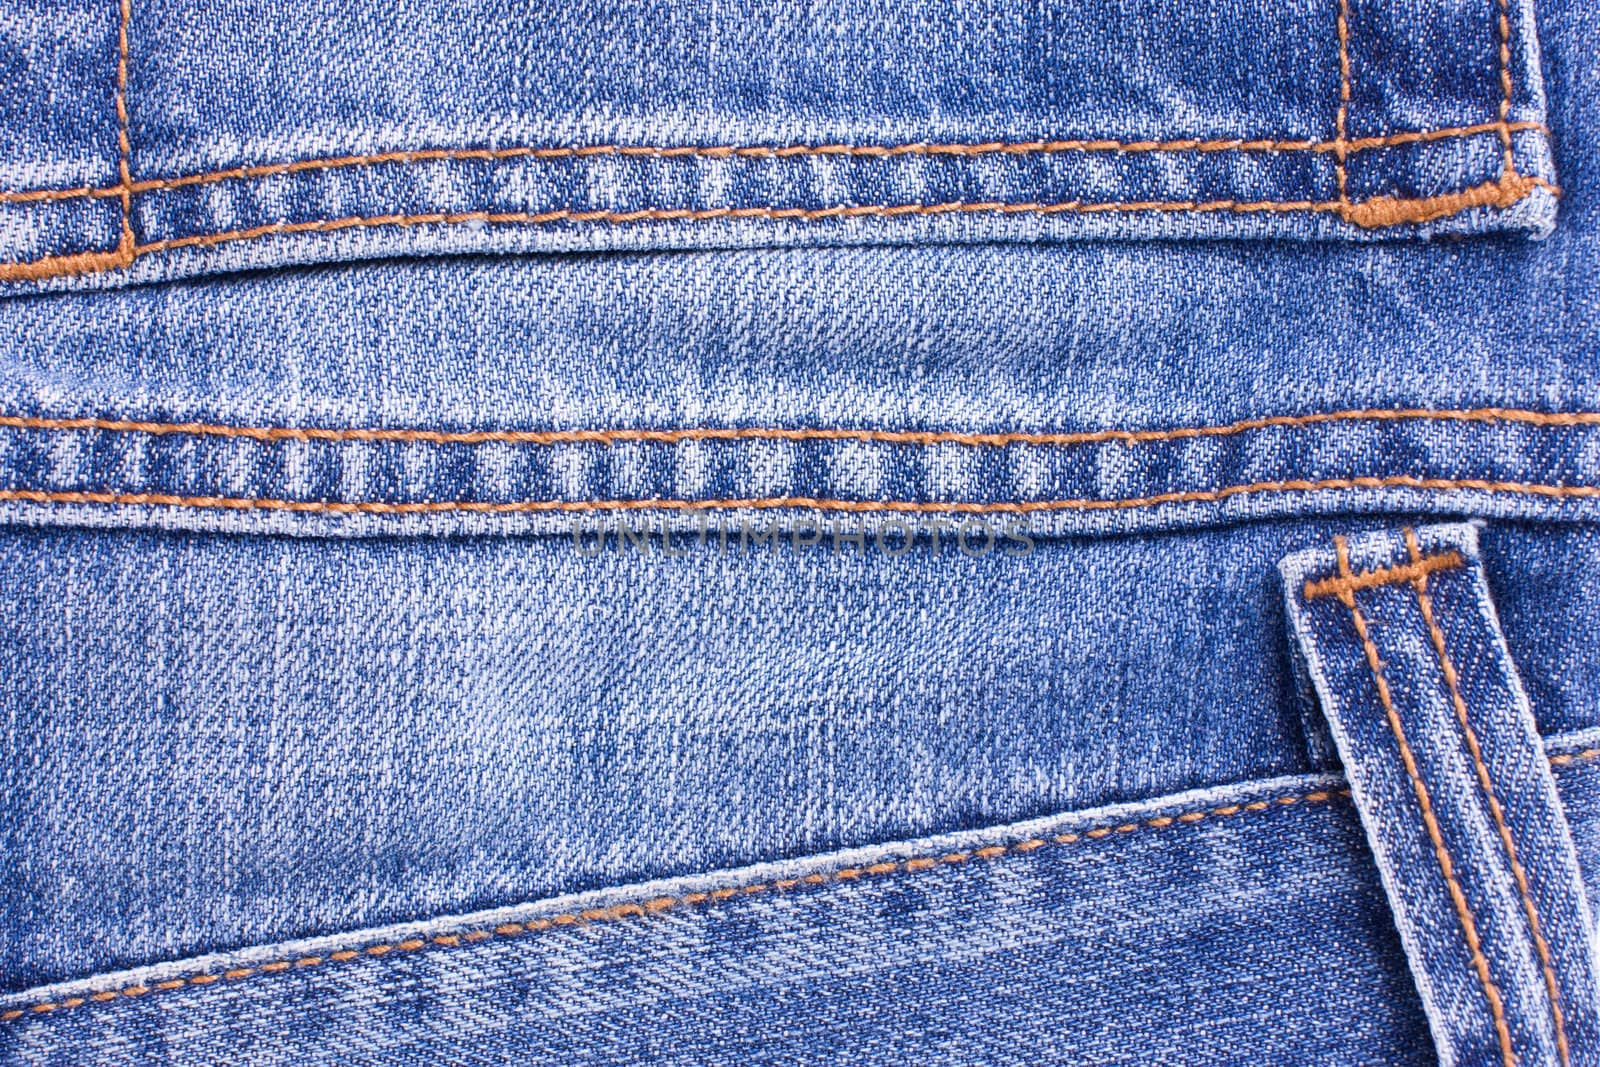 Blue Jeans Background with Seams Close-up